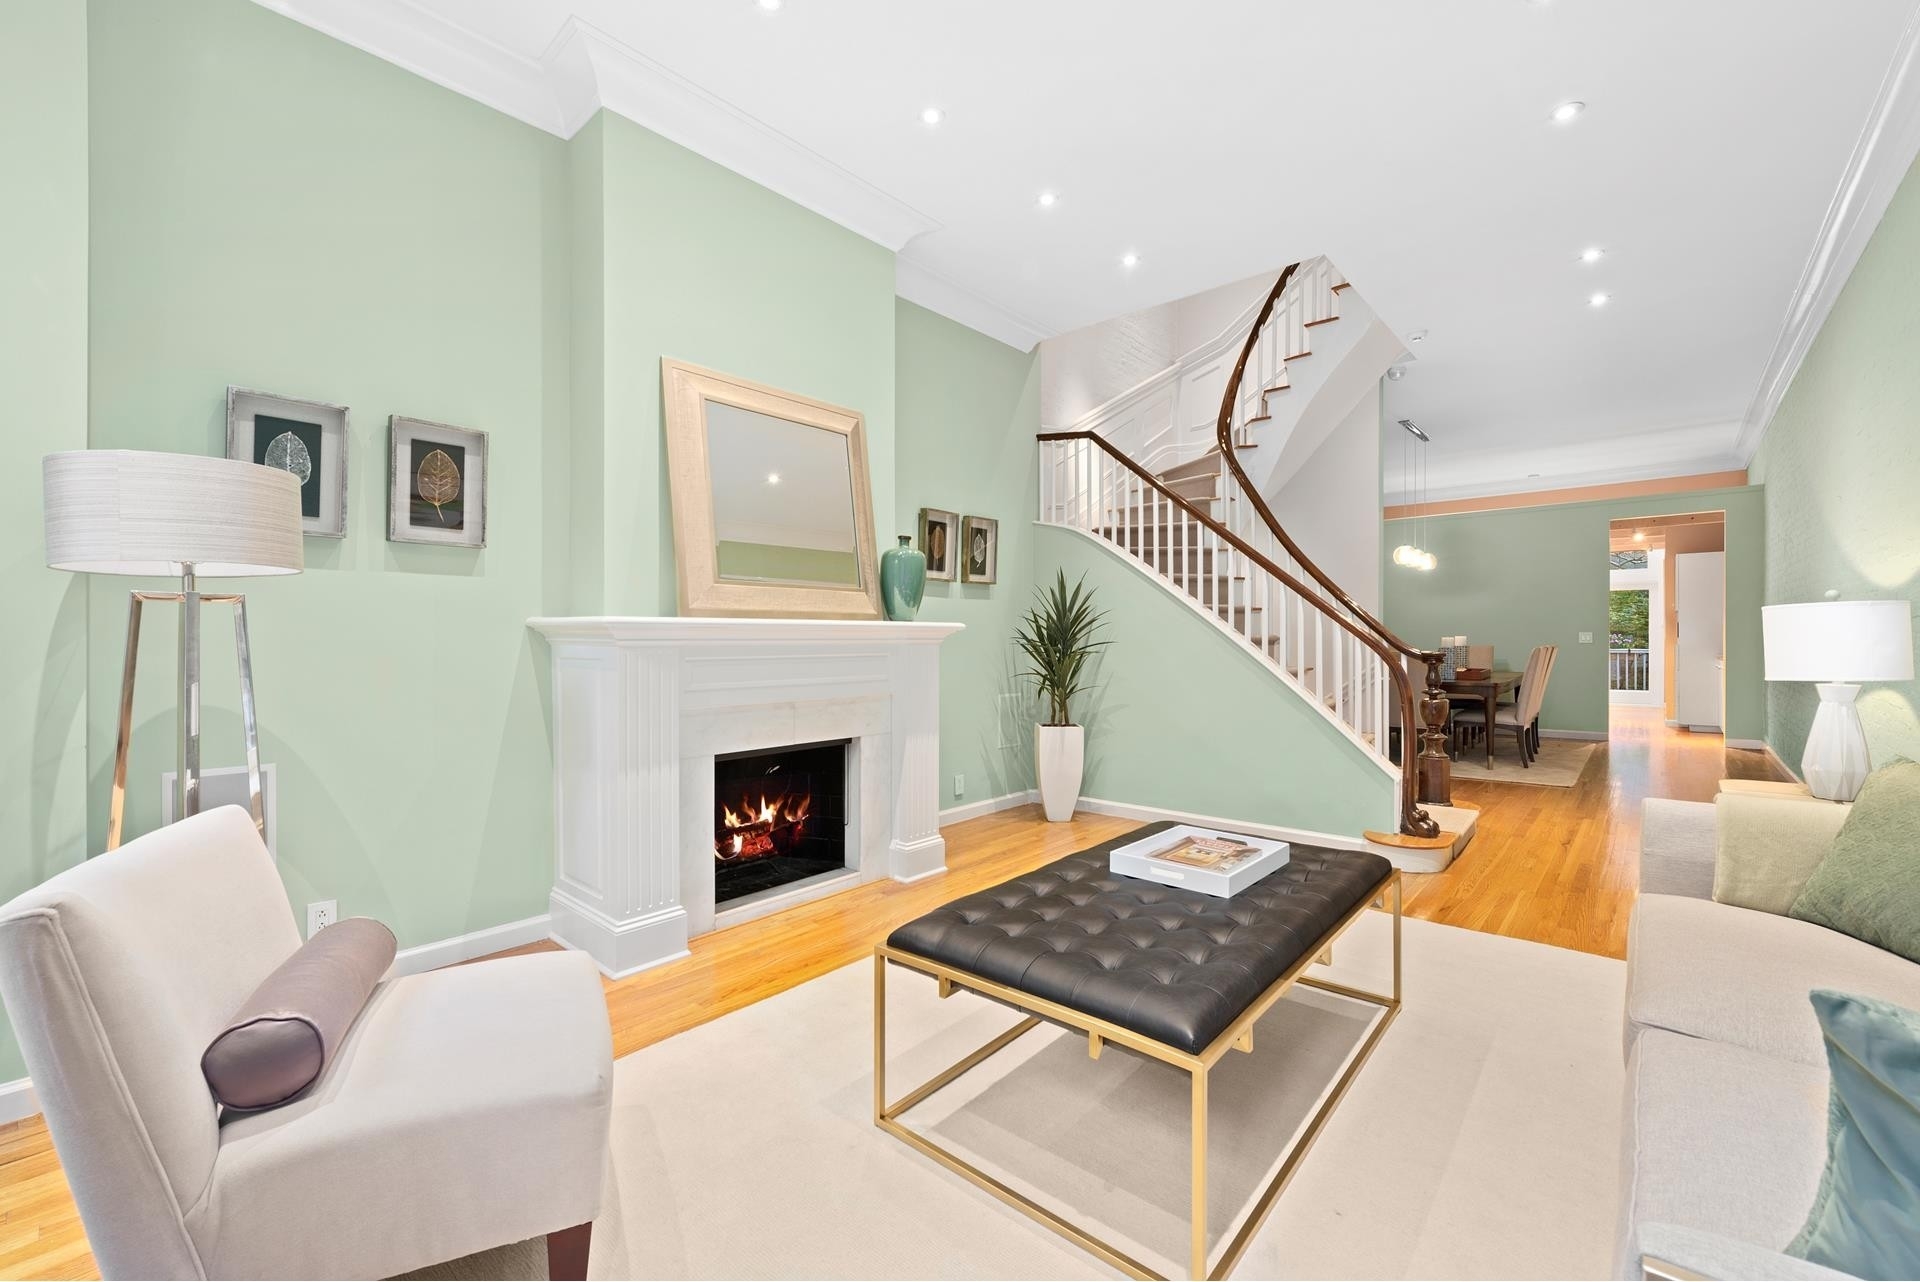 3. Single Family Townhouse for Sale at 247 E 71ST ST, TOWNHOUSE Lenox Hill, New York, NY 10021